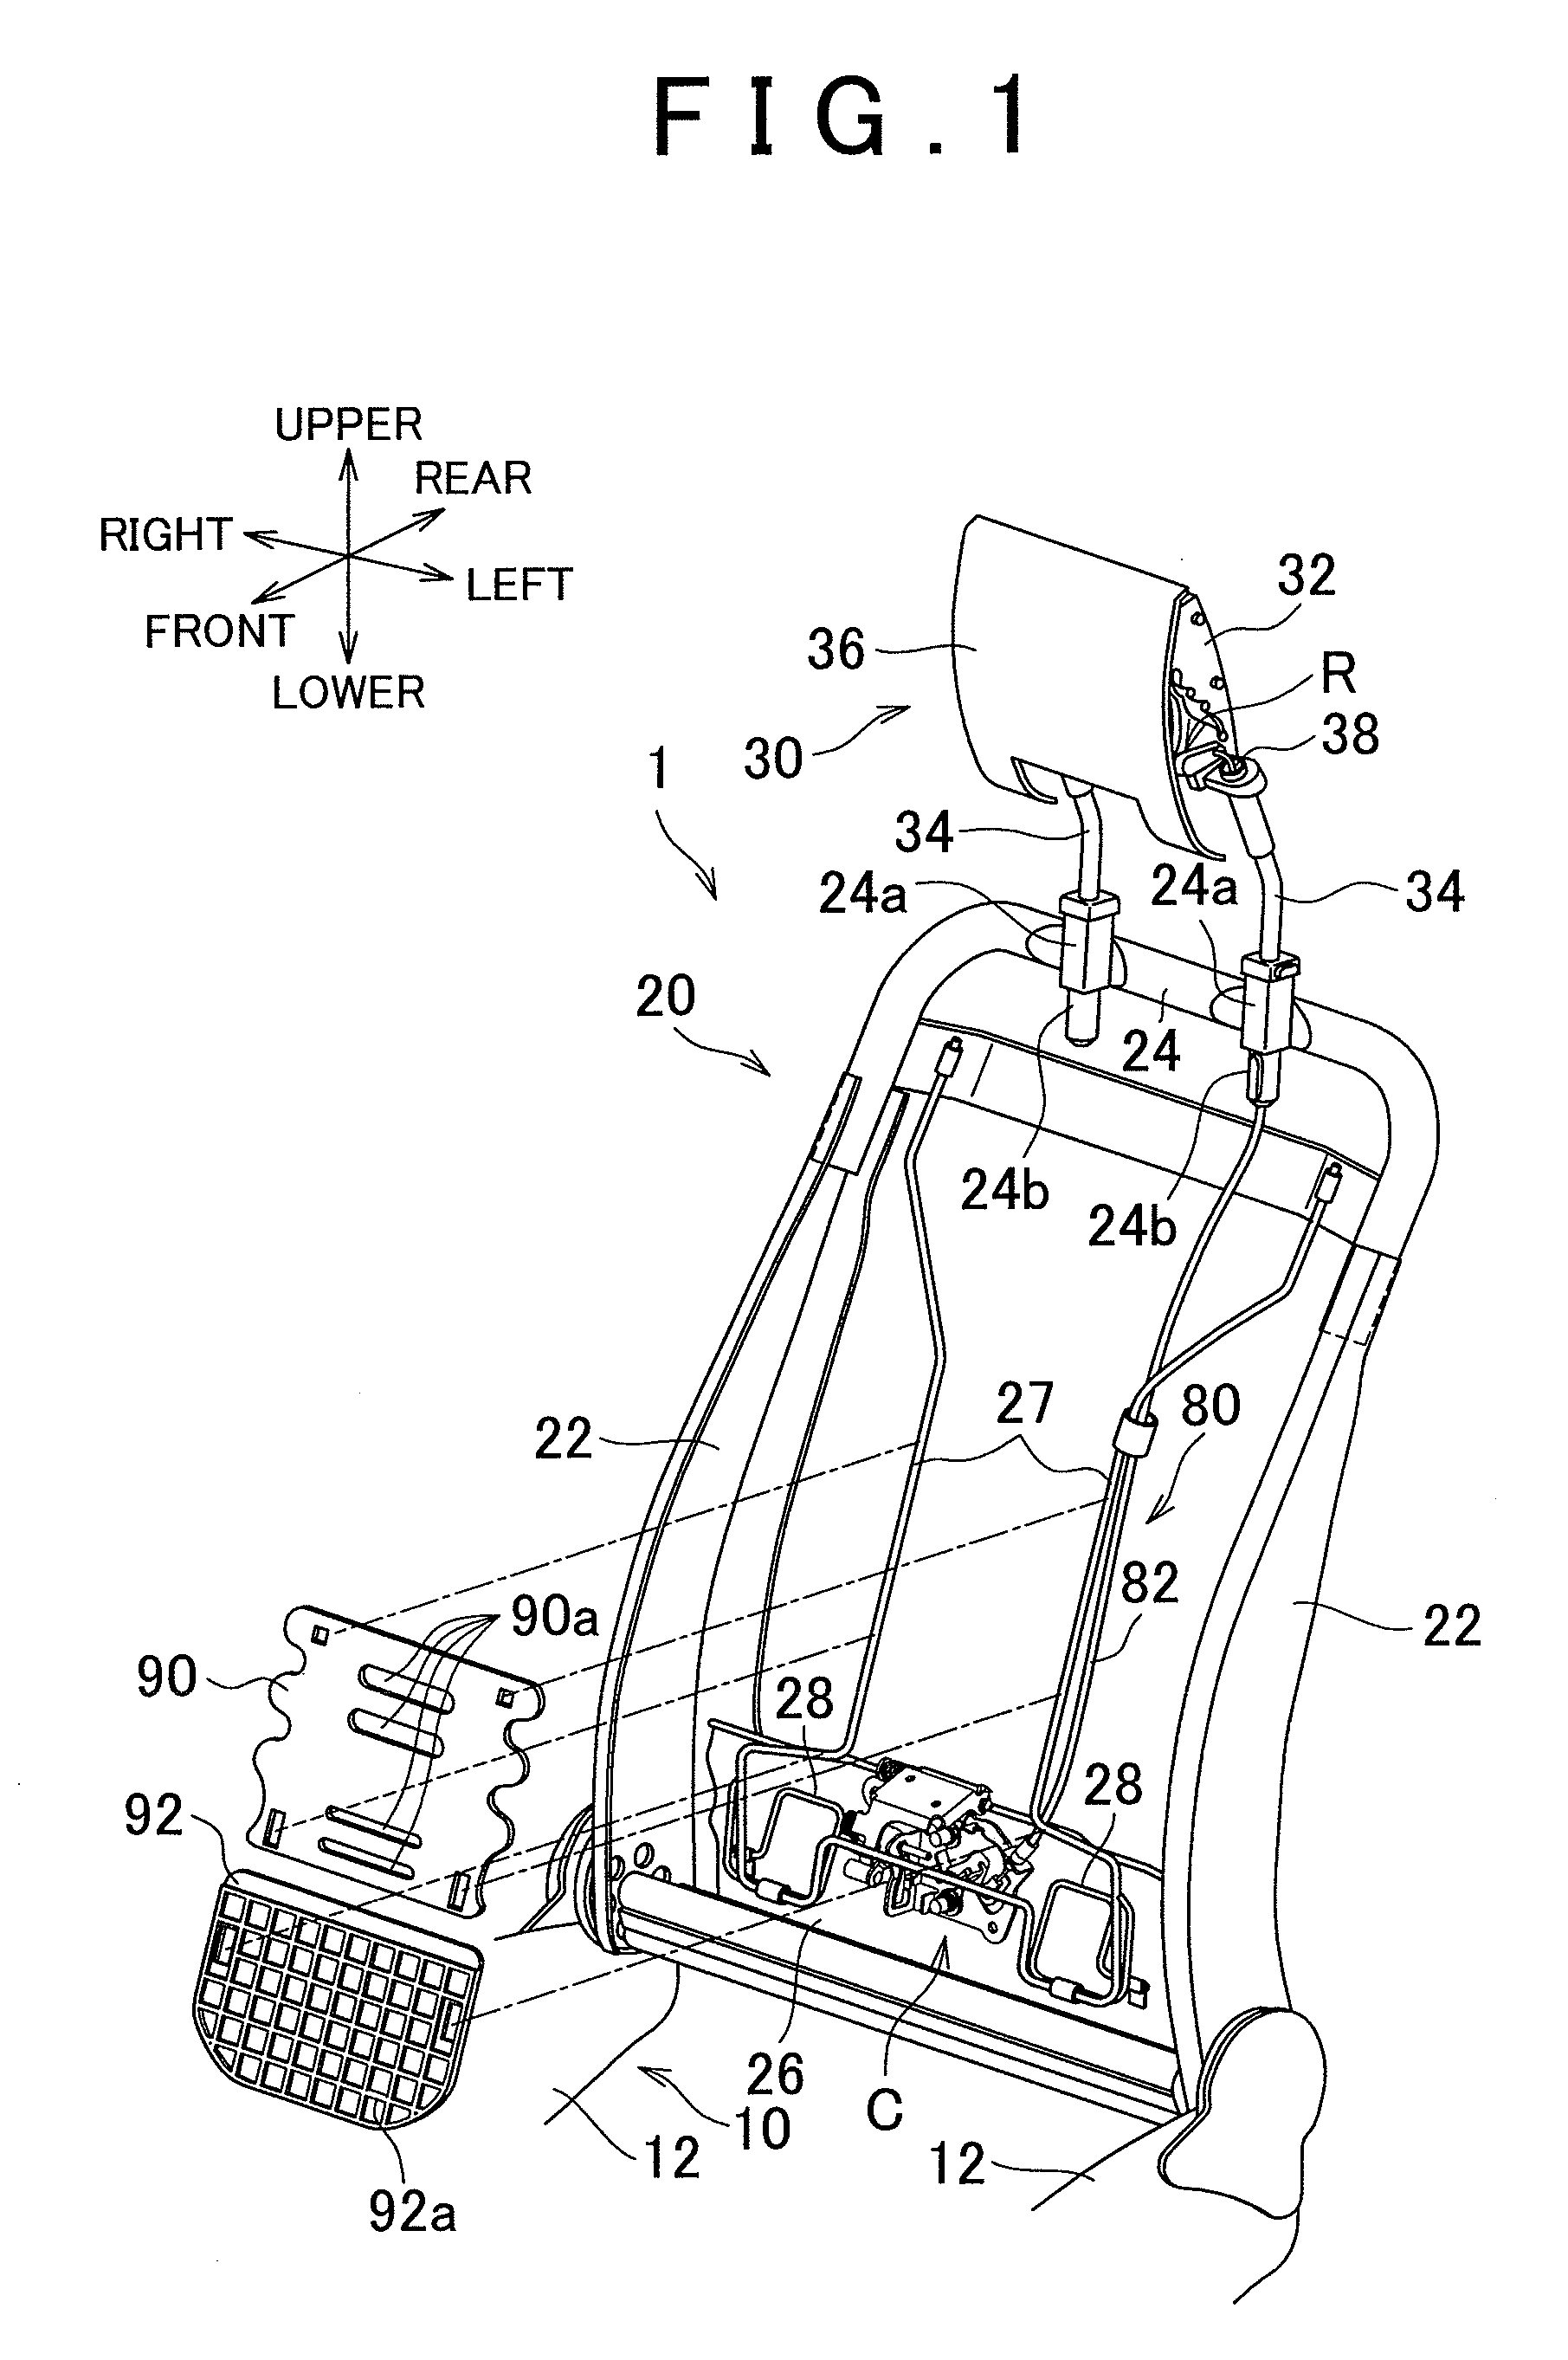 Internal structure of seatback connected to active headrest